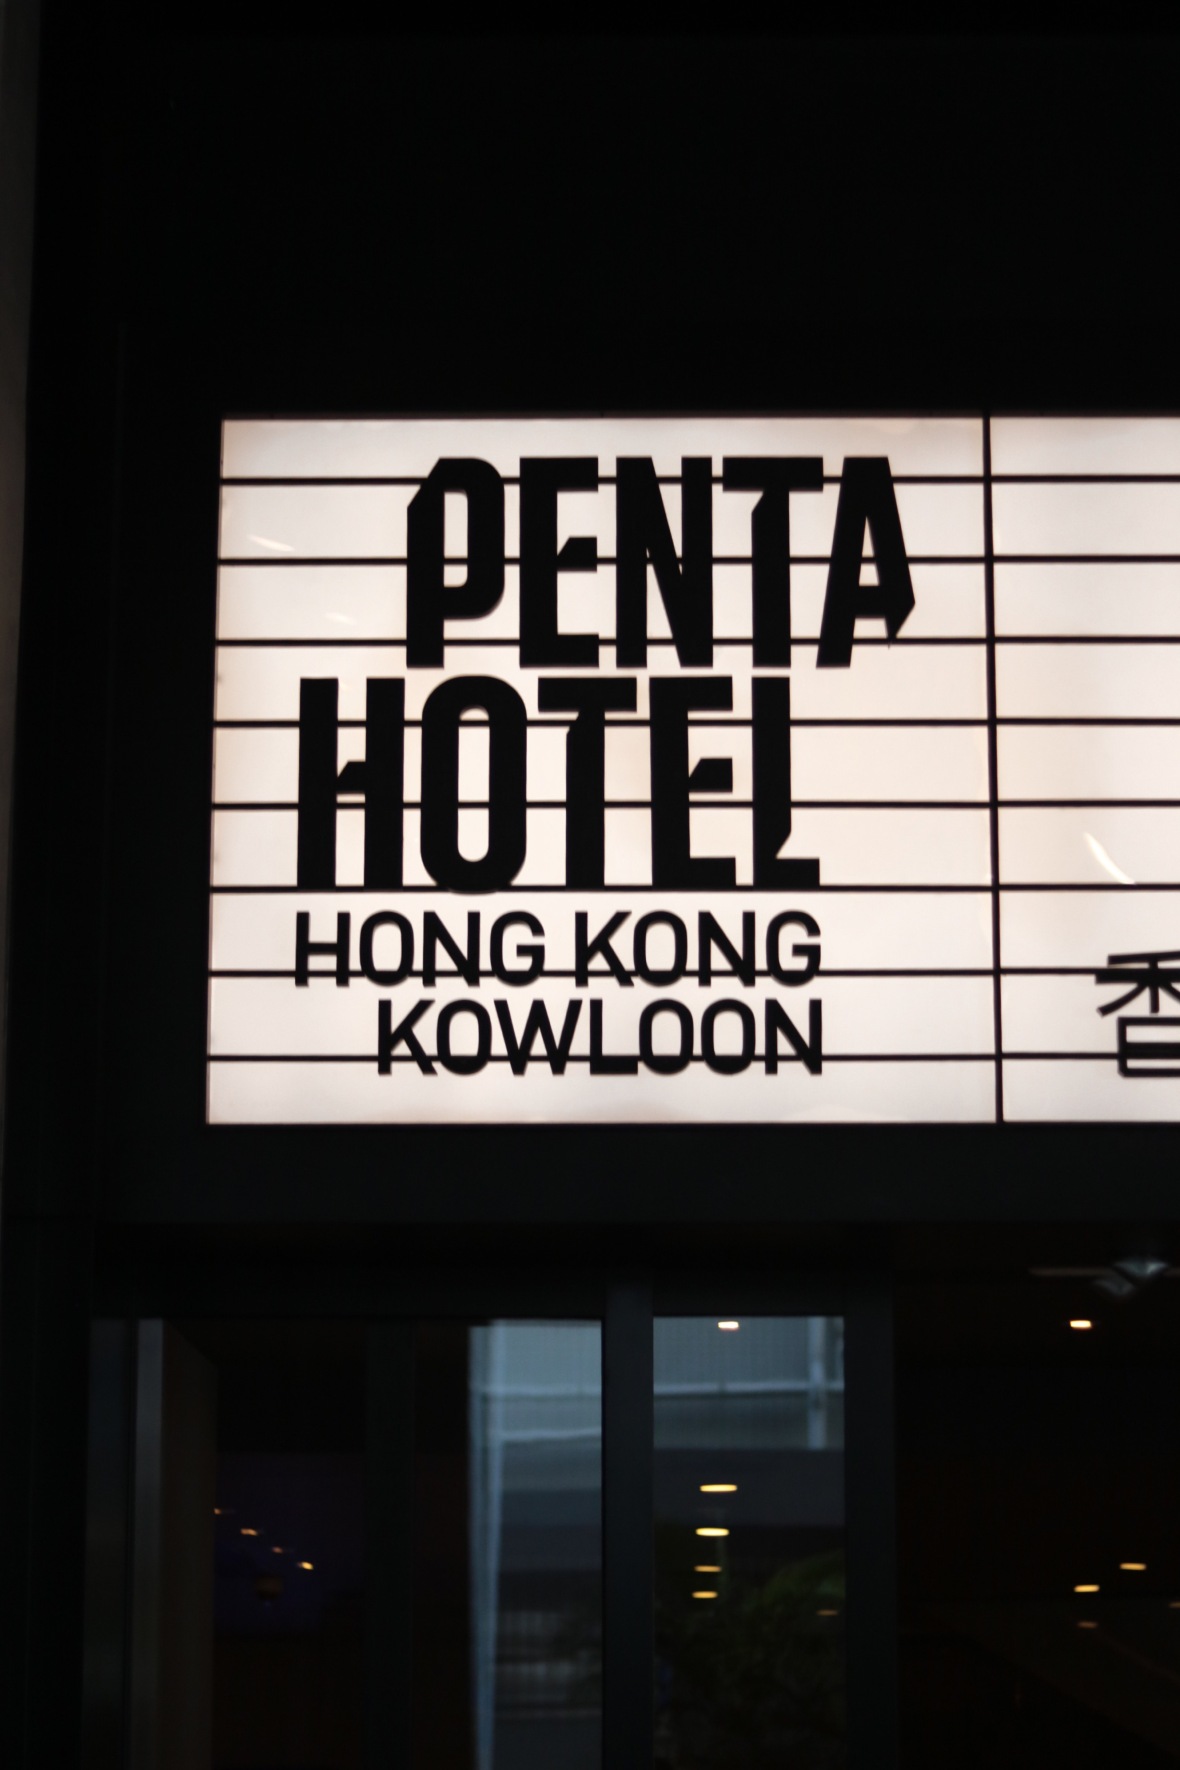 The Pentahotel Hong Kong review blogger And A Thousand Words